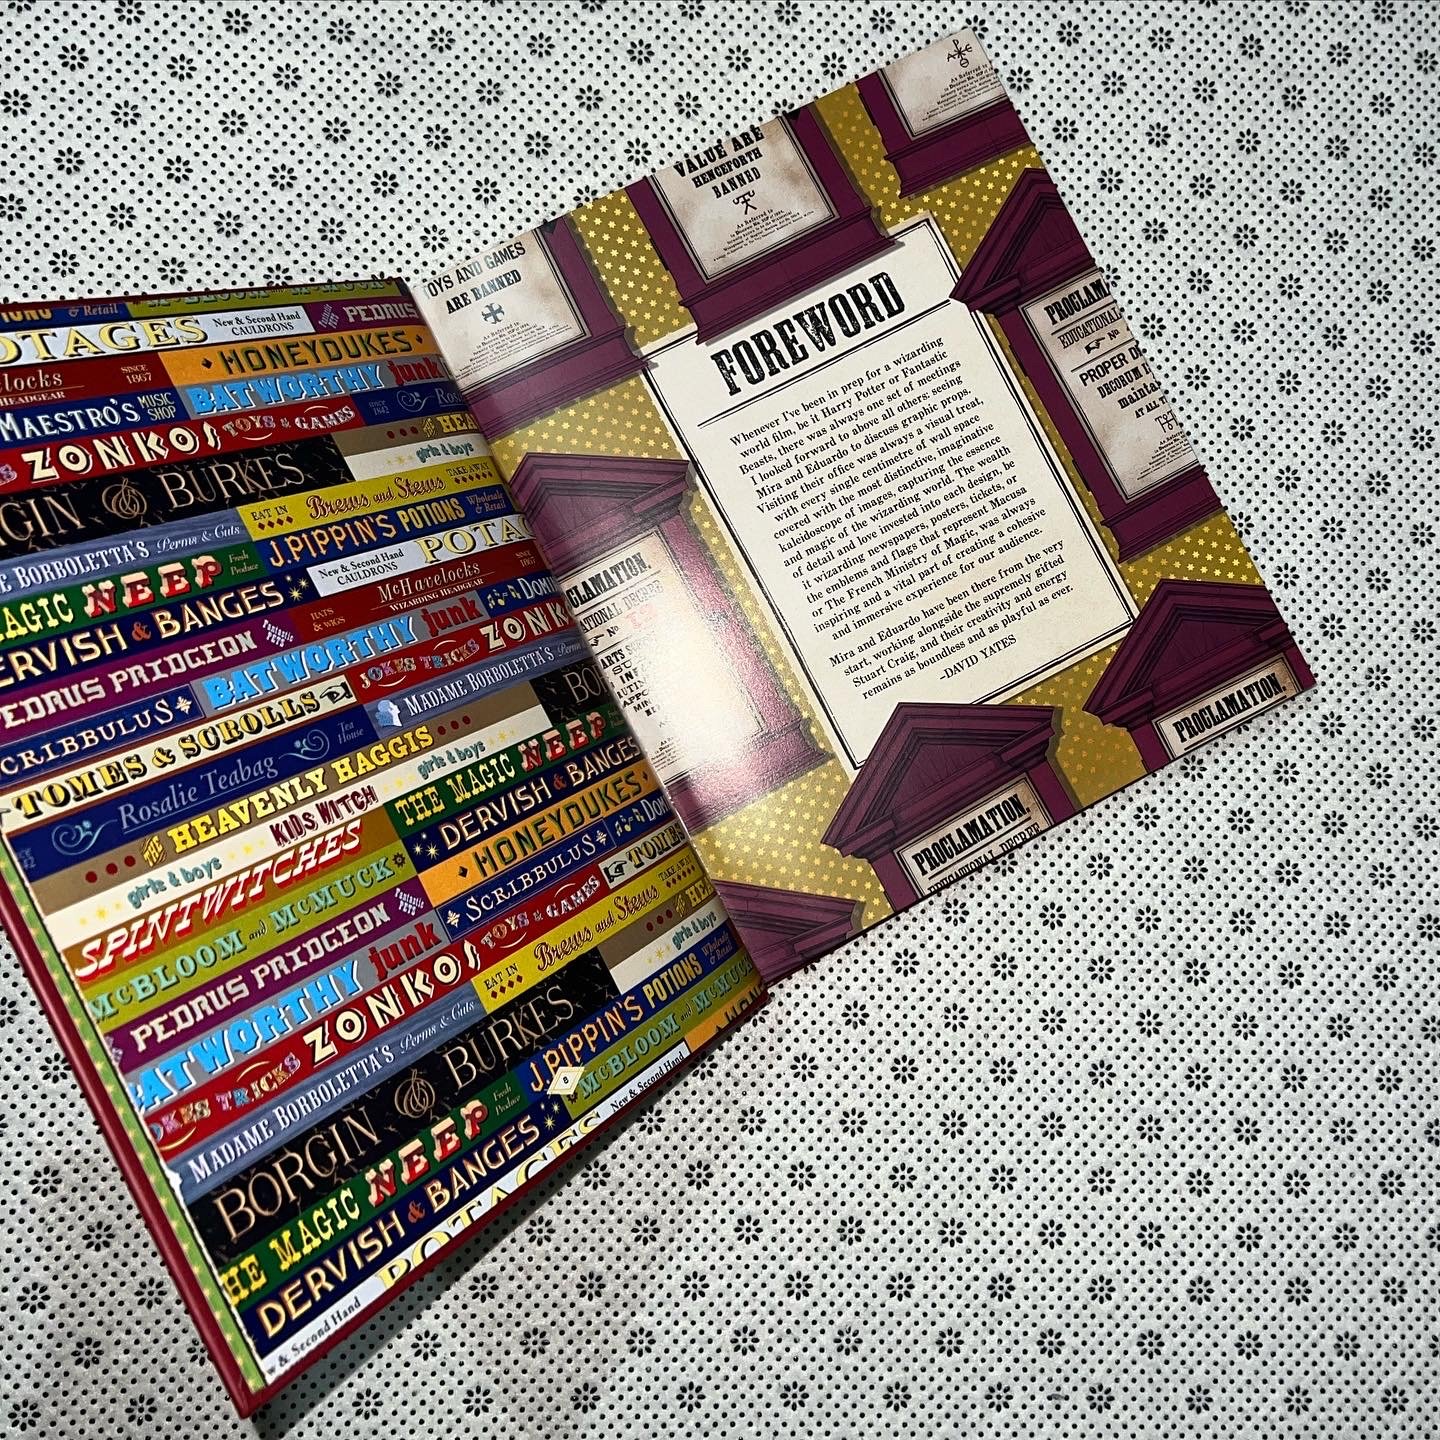 Review: The Magic of MinaLima: Celebrating the Graphic Design